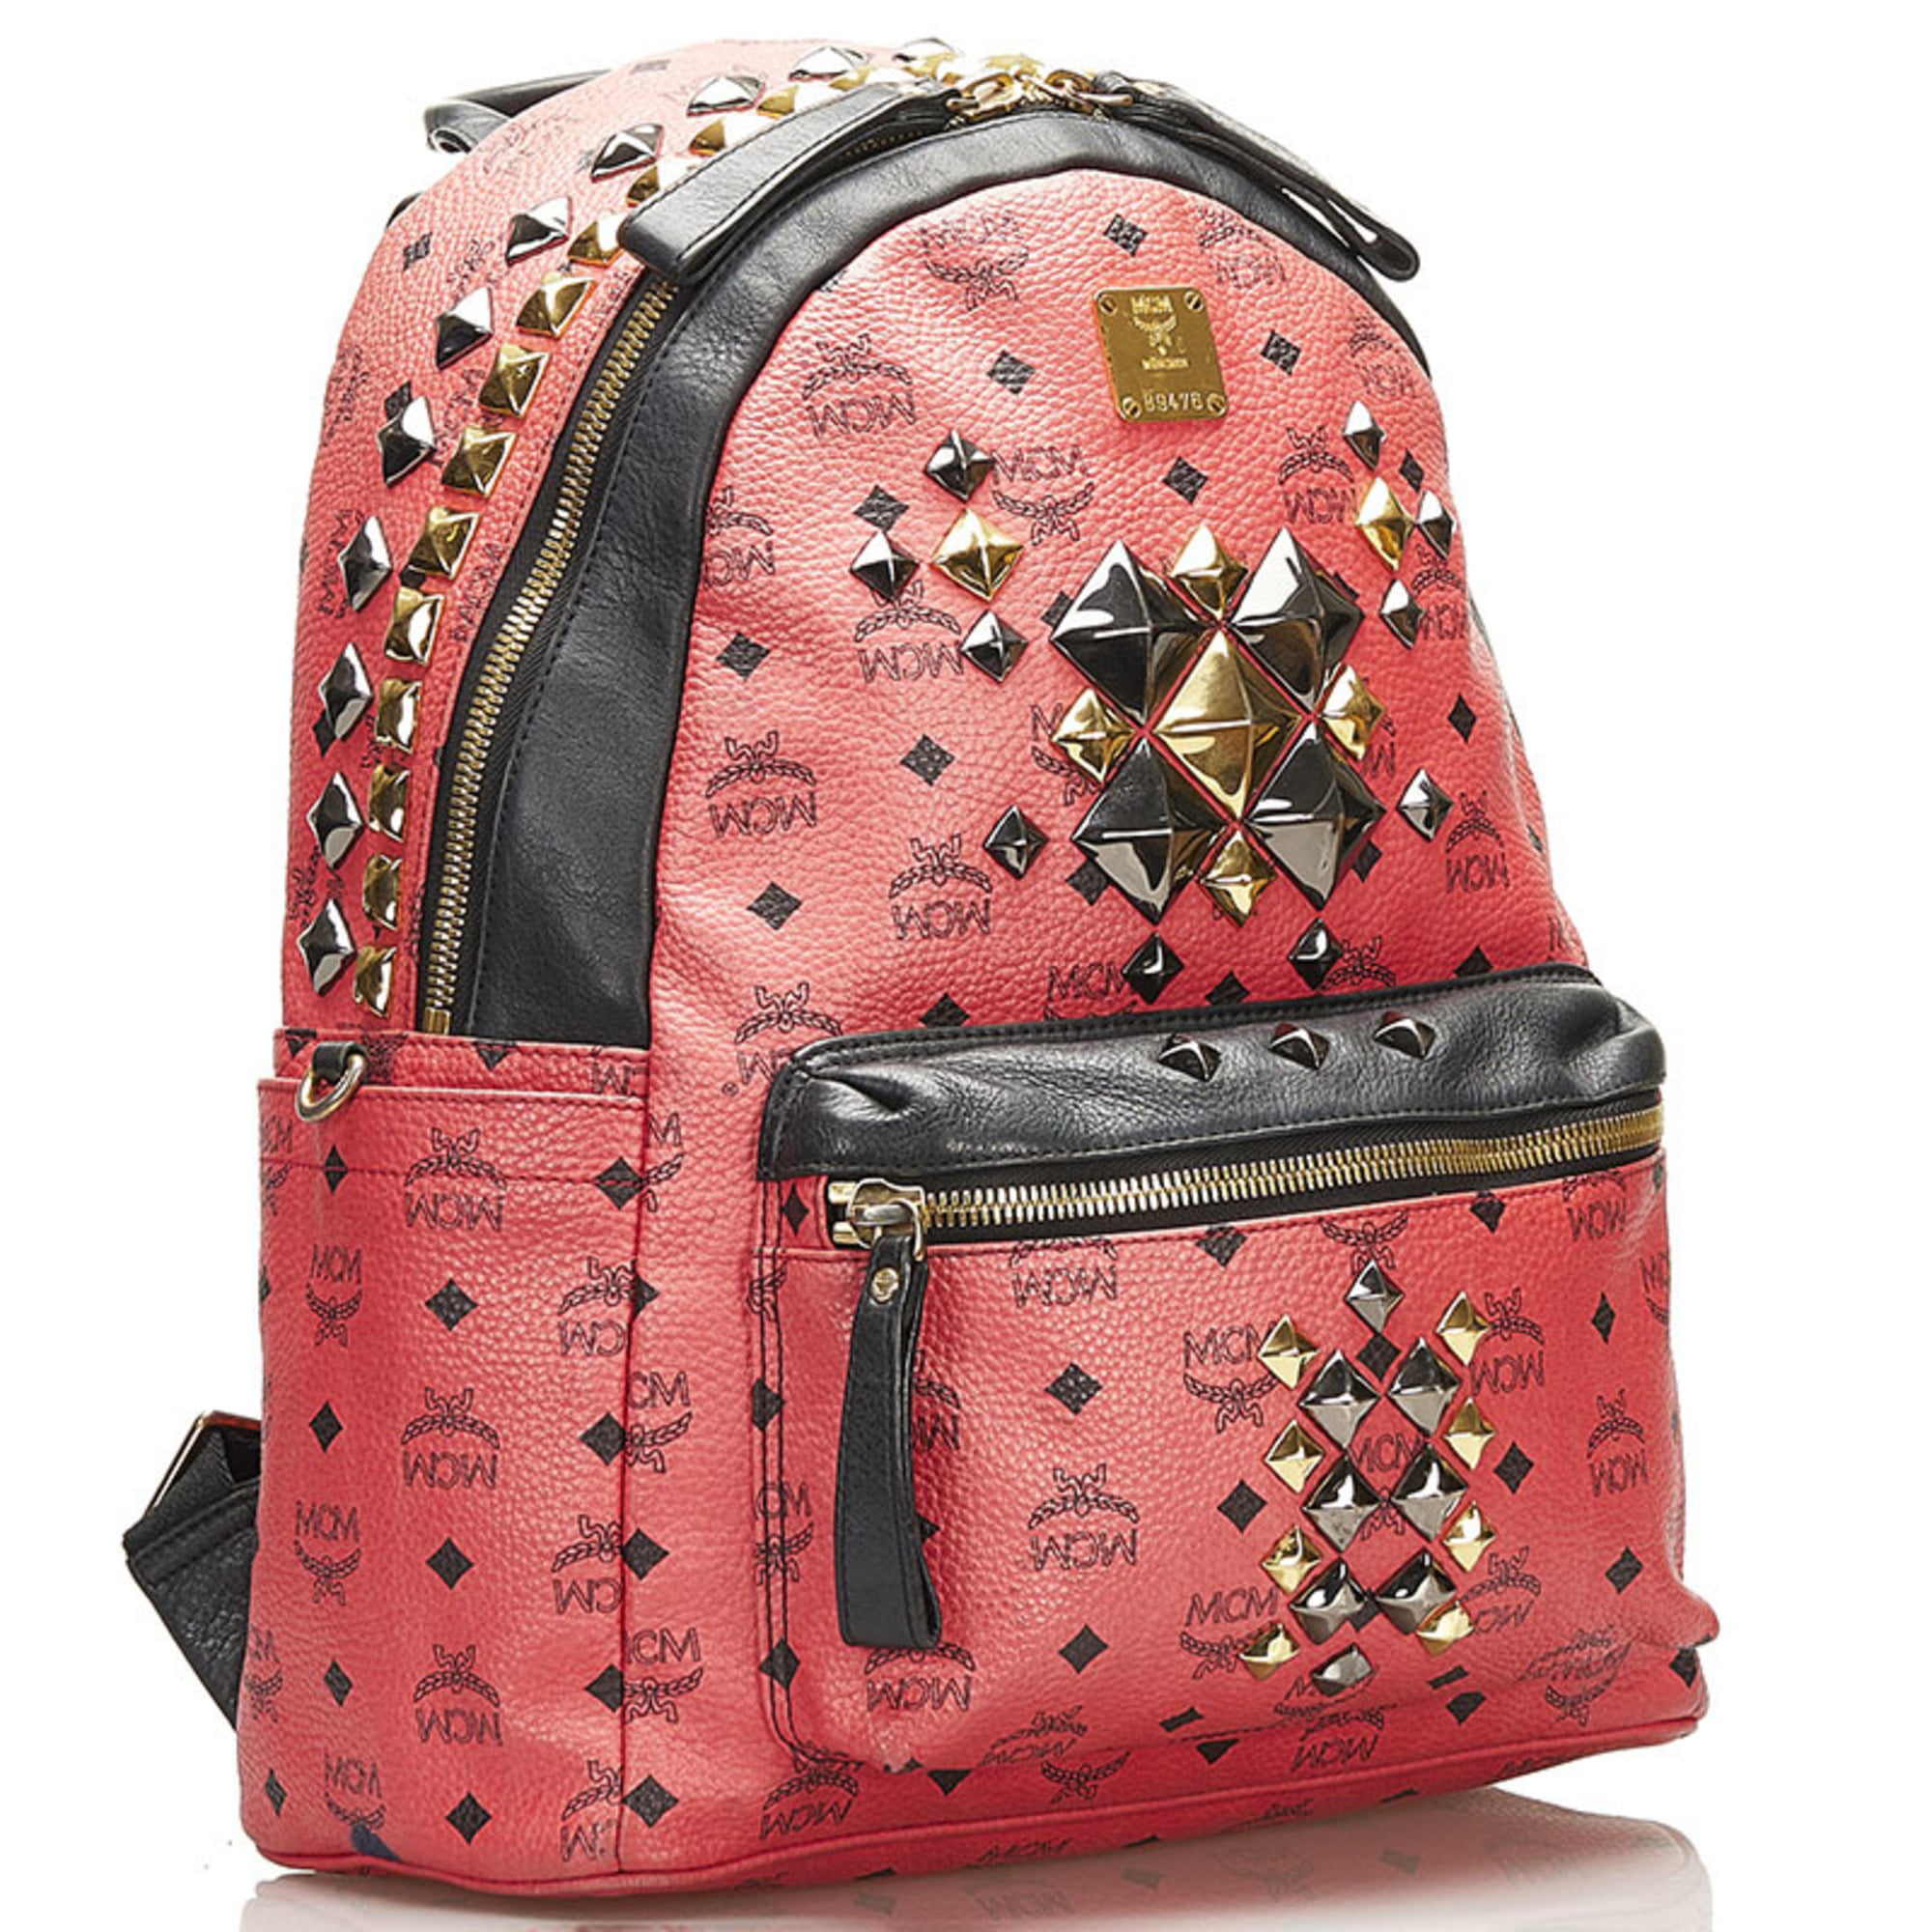 Womens Pre-Owned Authenticated MCM Backpack Patent Leather Pink